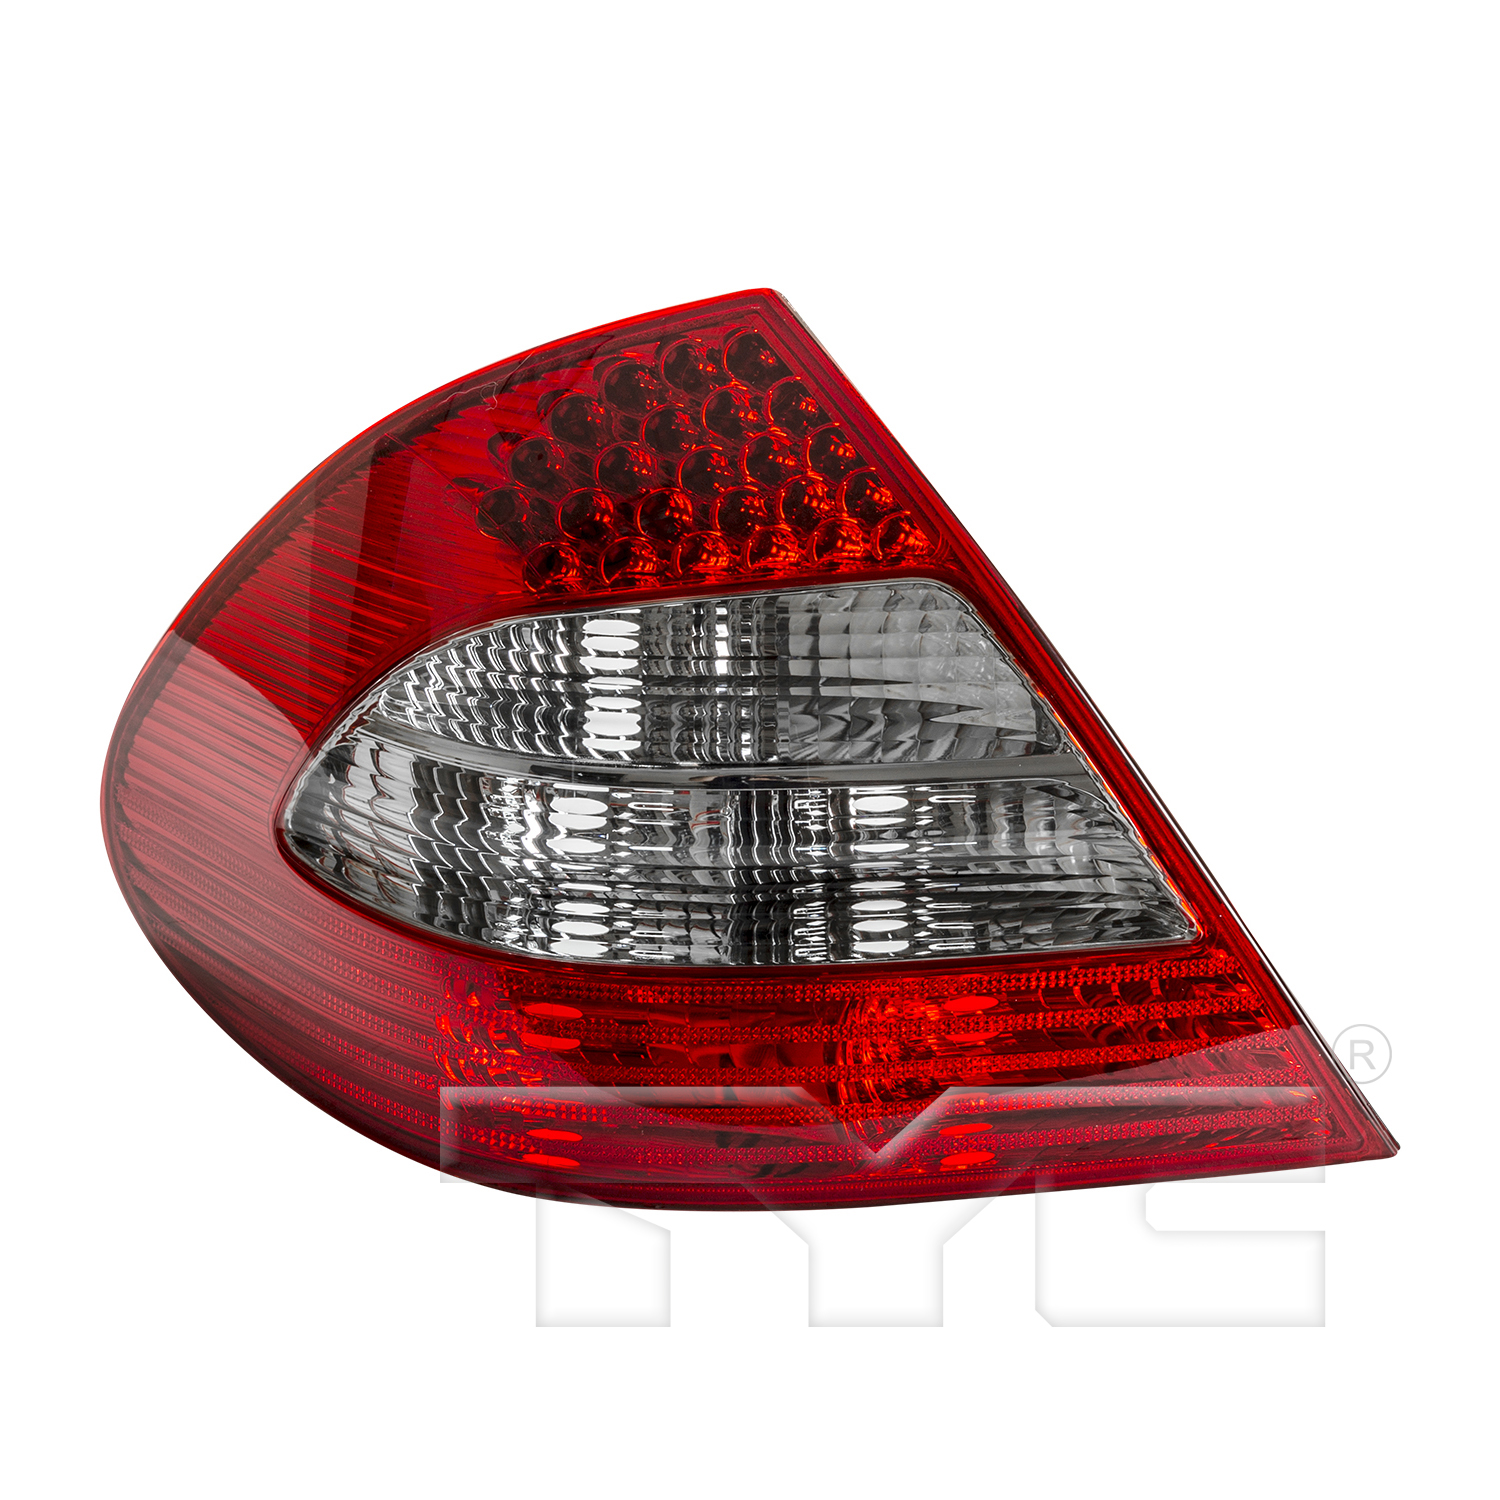 Aftermarket TAILLIGHTS for MERCEDES-BENZ - E63 AMG, E63 AMG,07-09,LT Taillamp assy